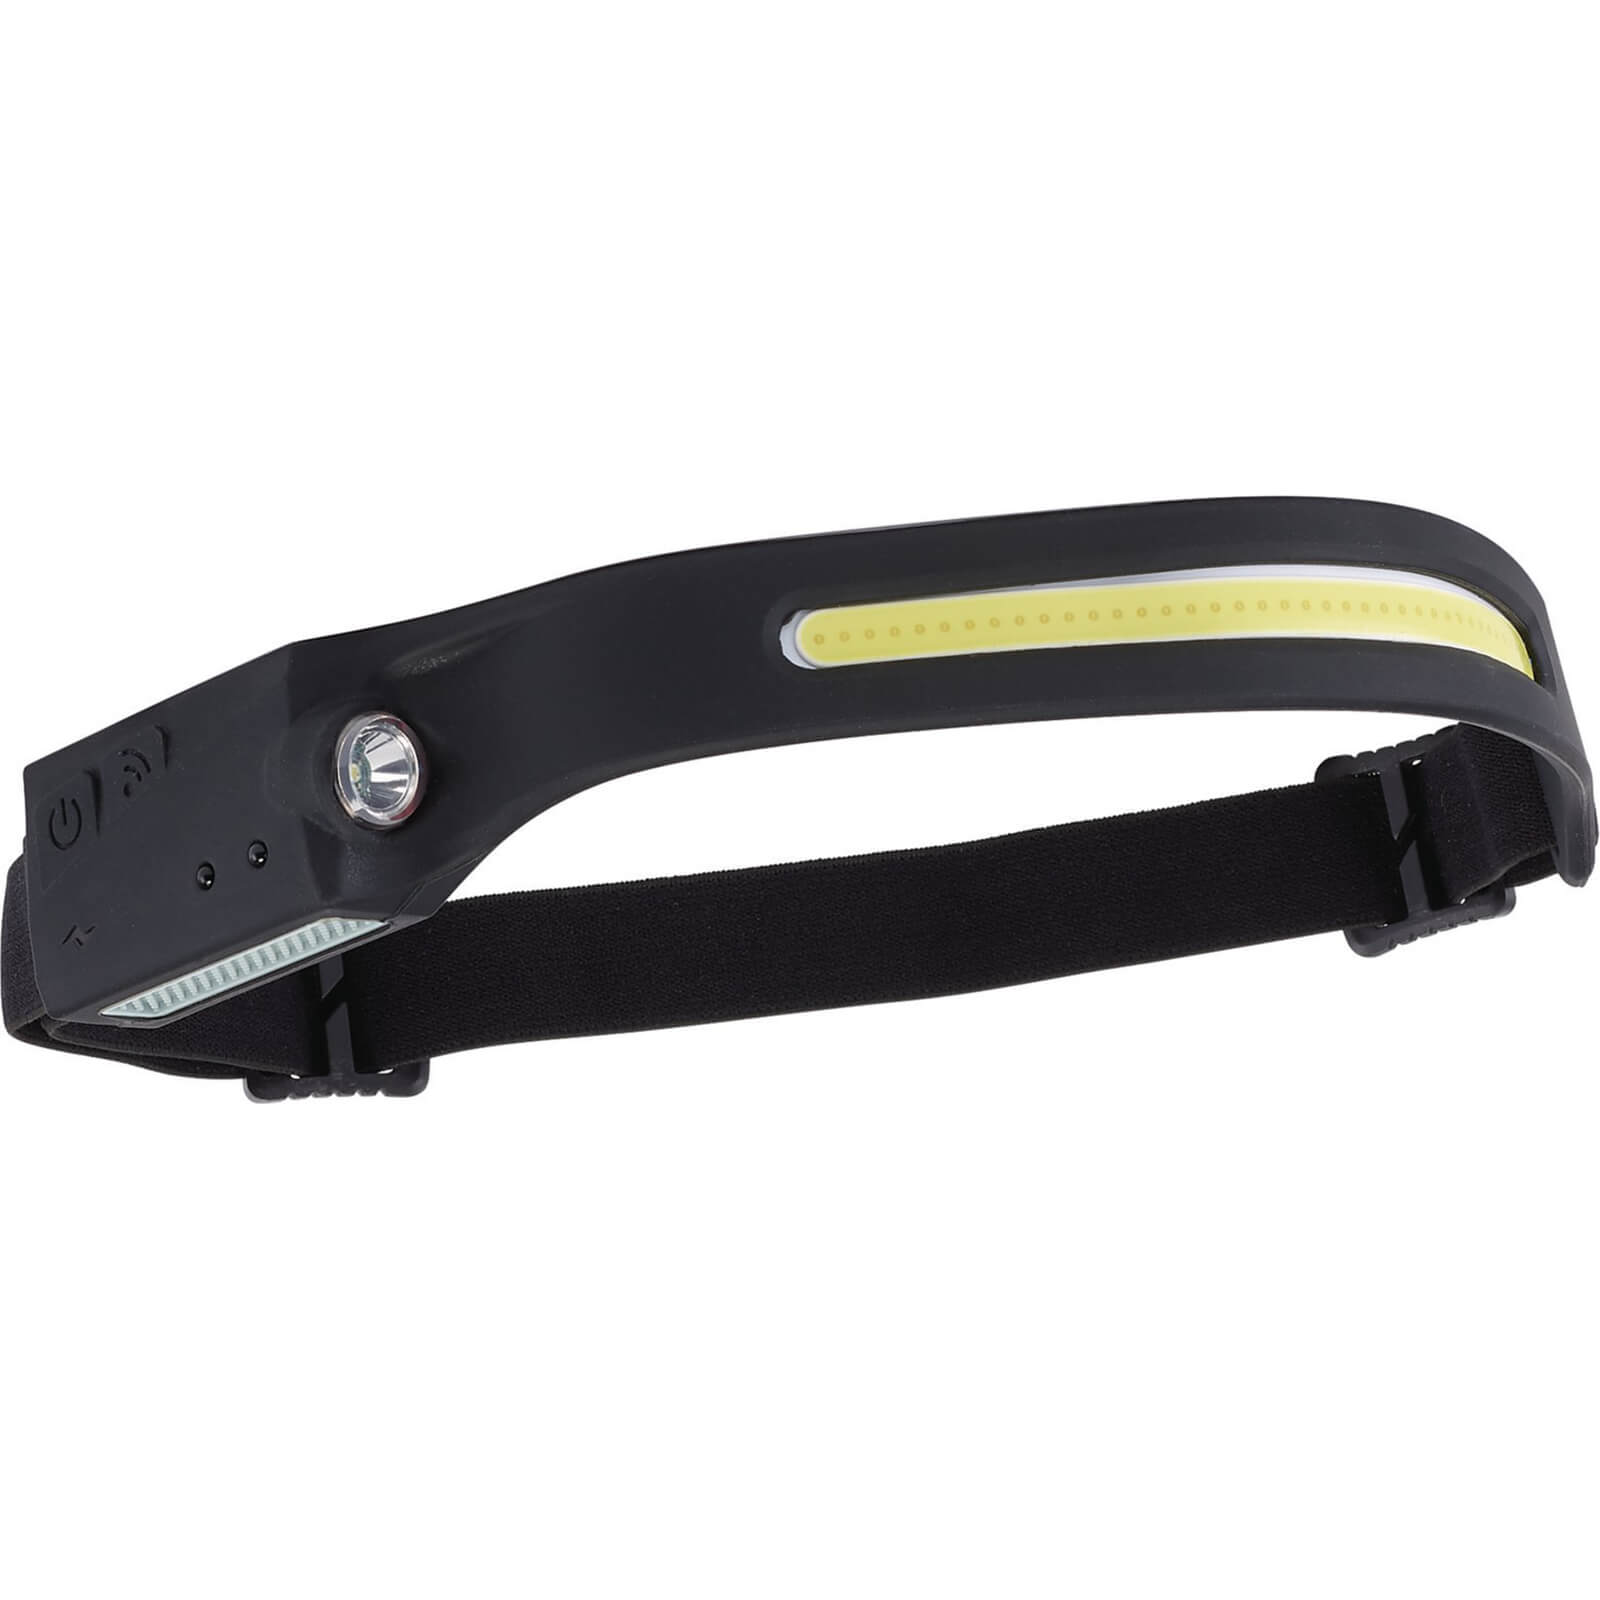 Image of Draper COB LED Rechargeable 2 in 1 Wave Sensor Head Torch Black